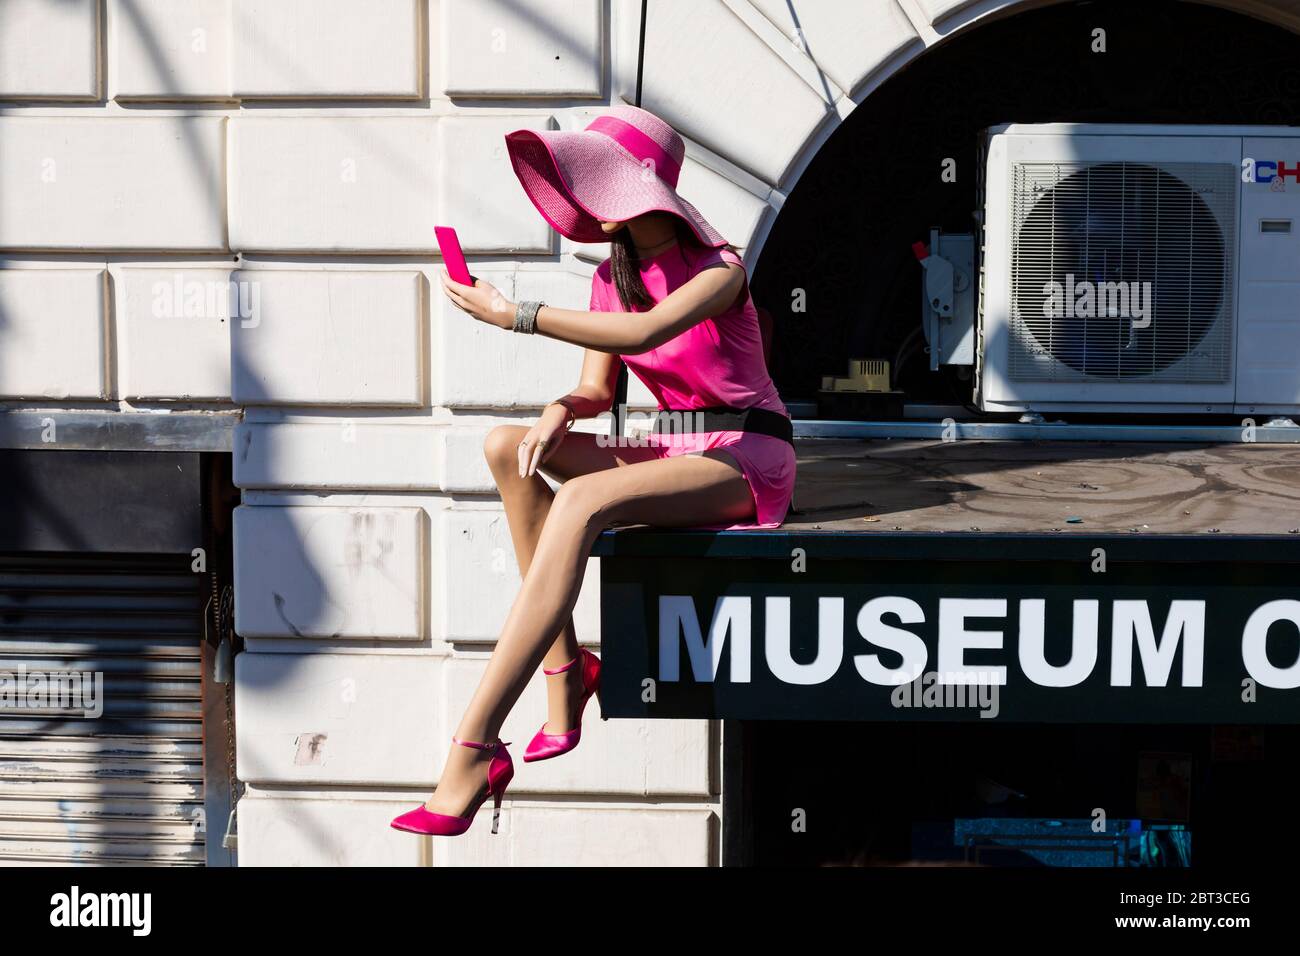 Female mannequin over the door of the Hollywood Museum of Selfies, Los Angeles, California, United States of America Stock Photo